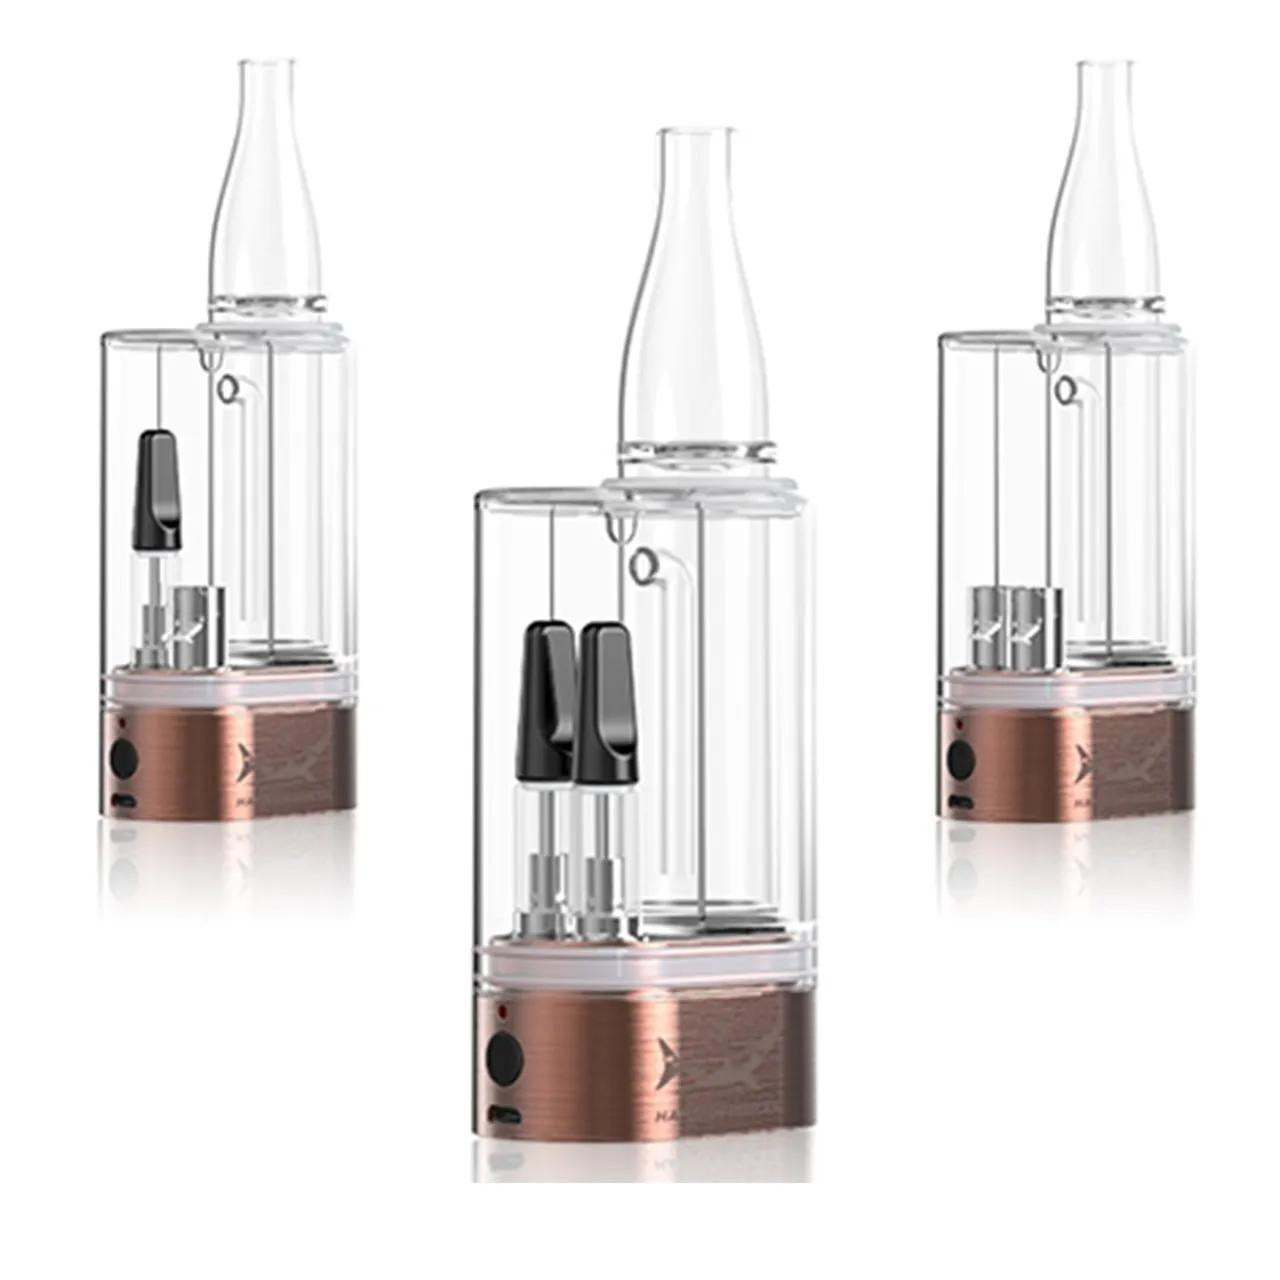 Hamilton Concentrate & Cartridge Bubbler 2-in-1 -  Awesomevapestore